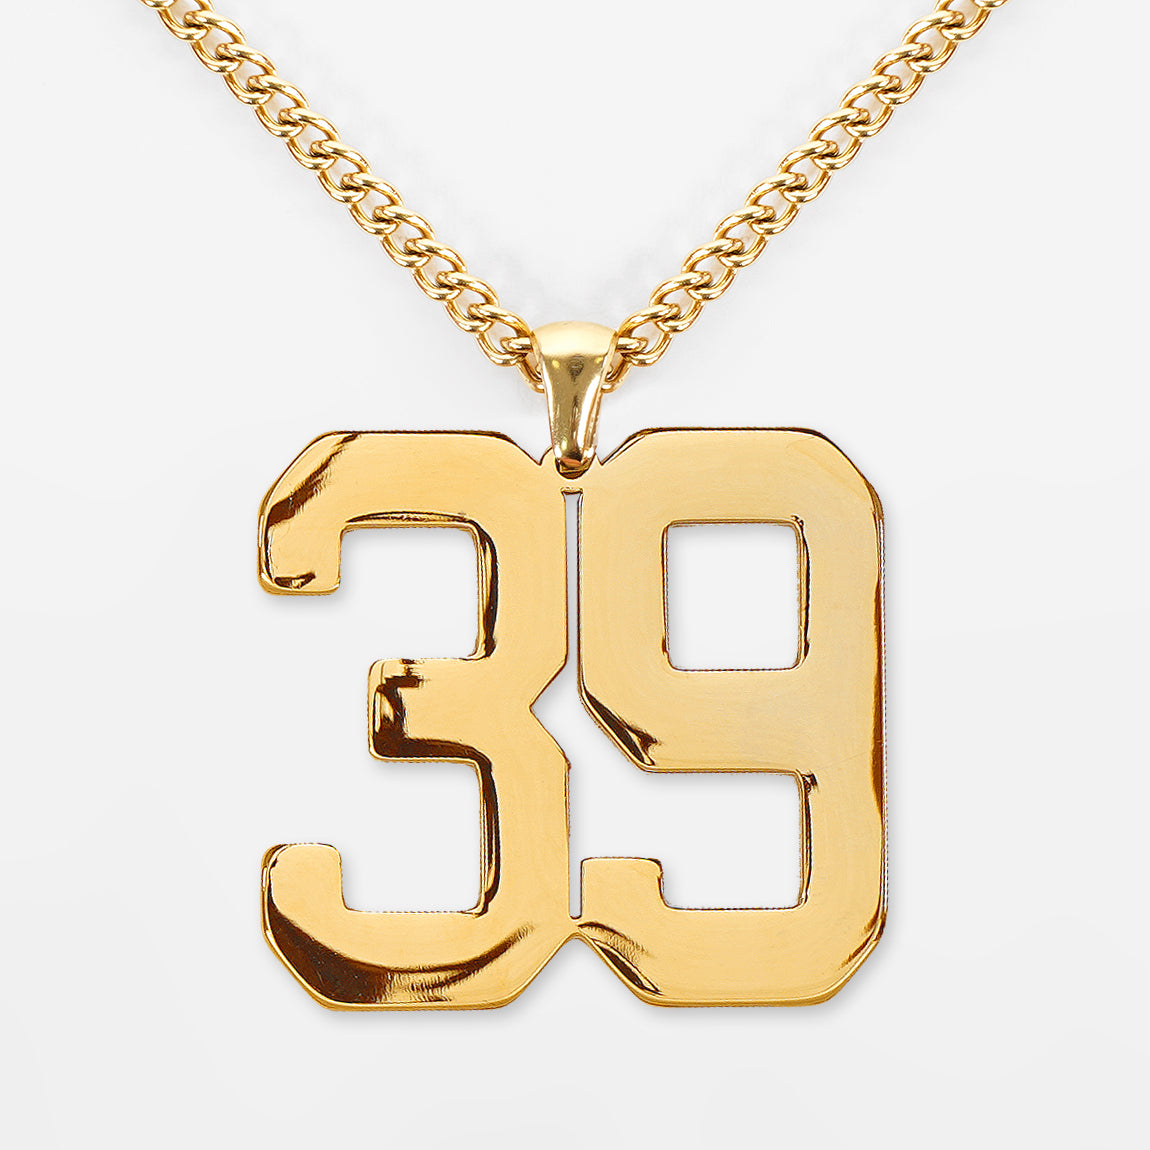 39 Number Pendant with Chain Necklace - Gold Plated Stainless Steel